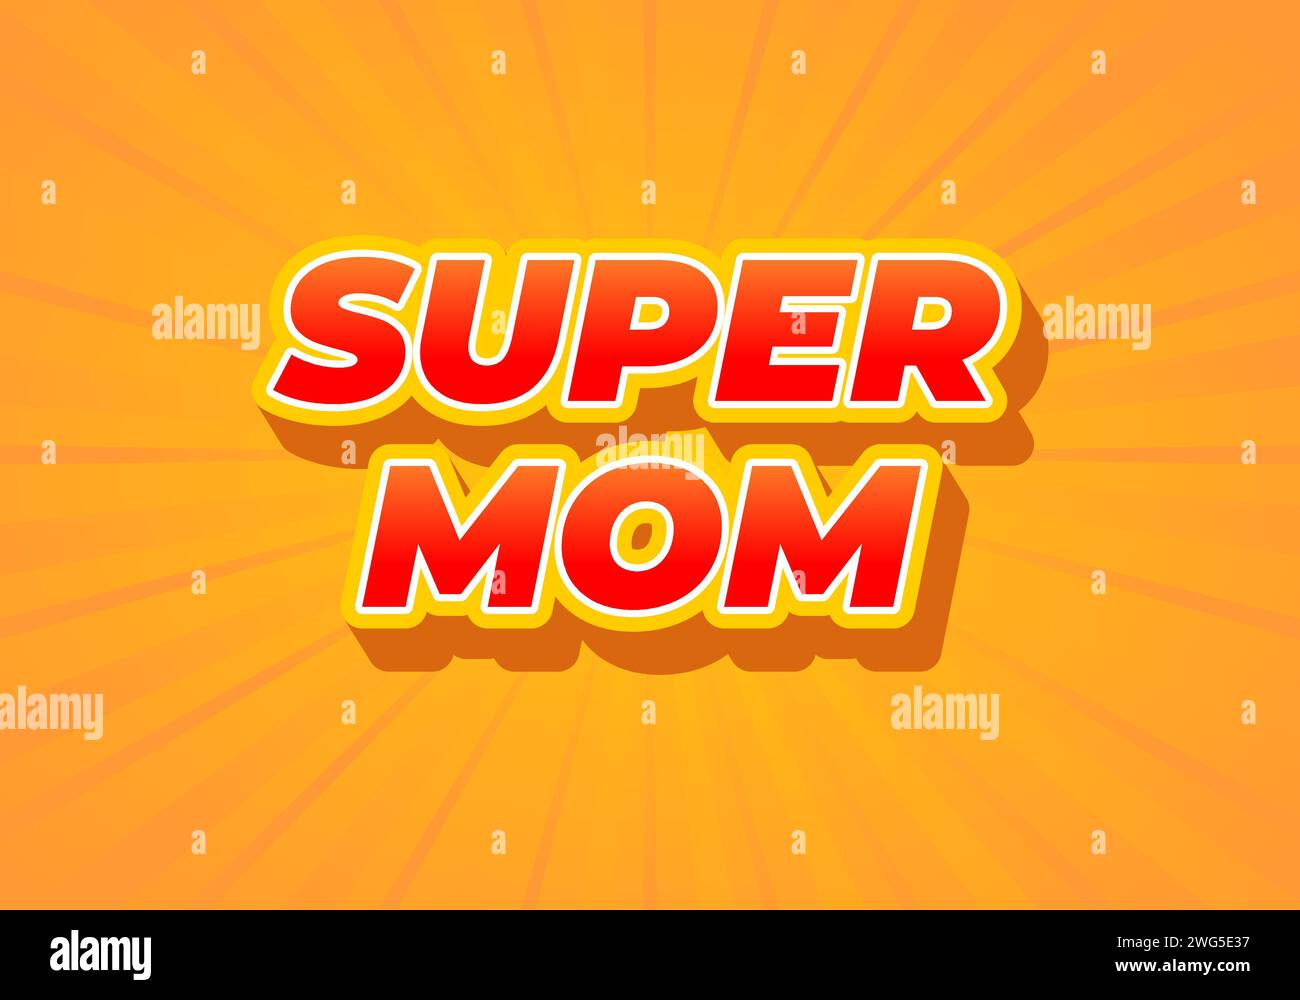 Super mom. Text effect design in 3D look. Red color. Yellow background Stock Vector